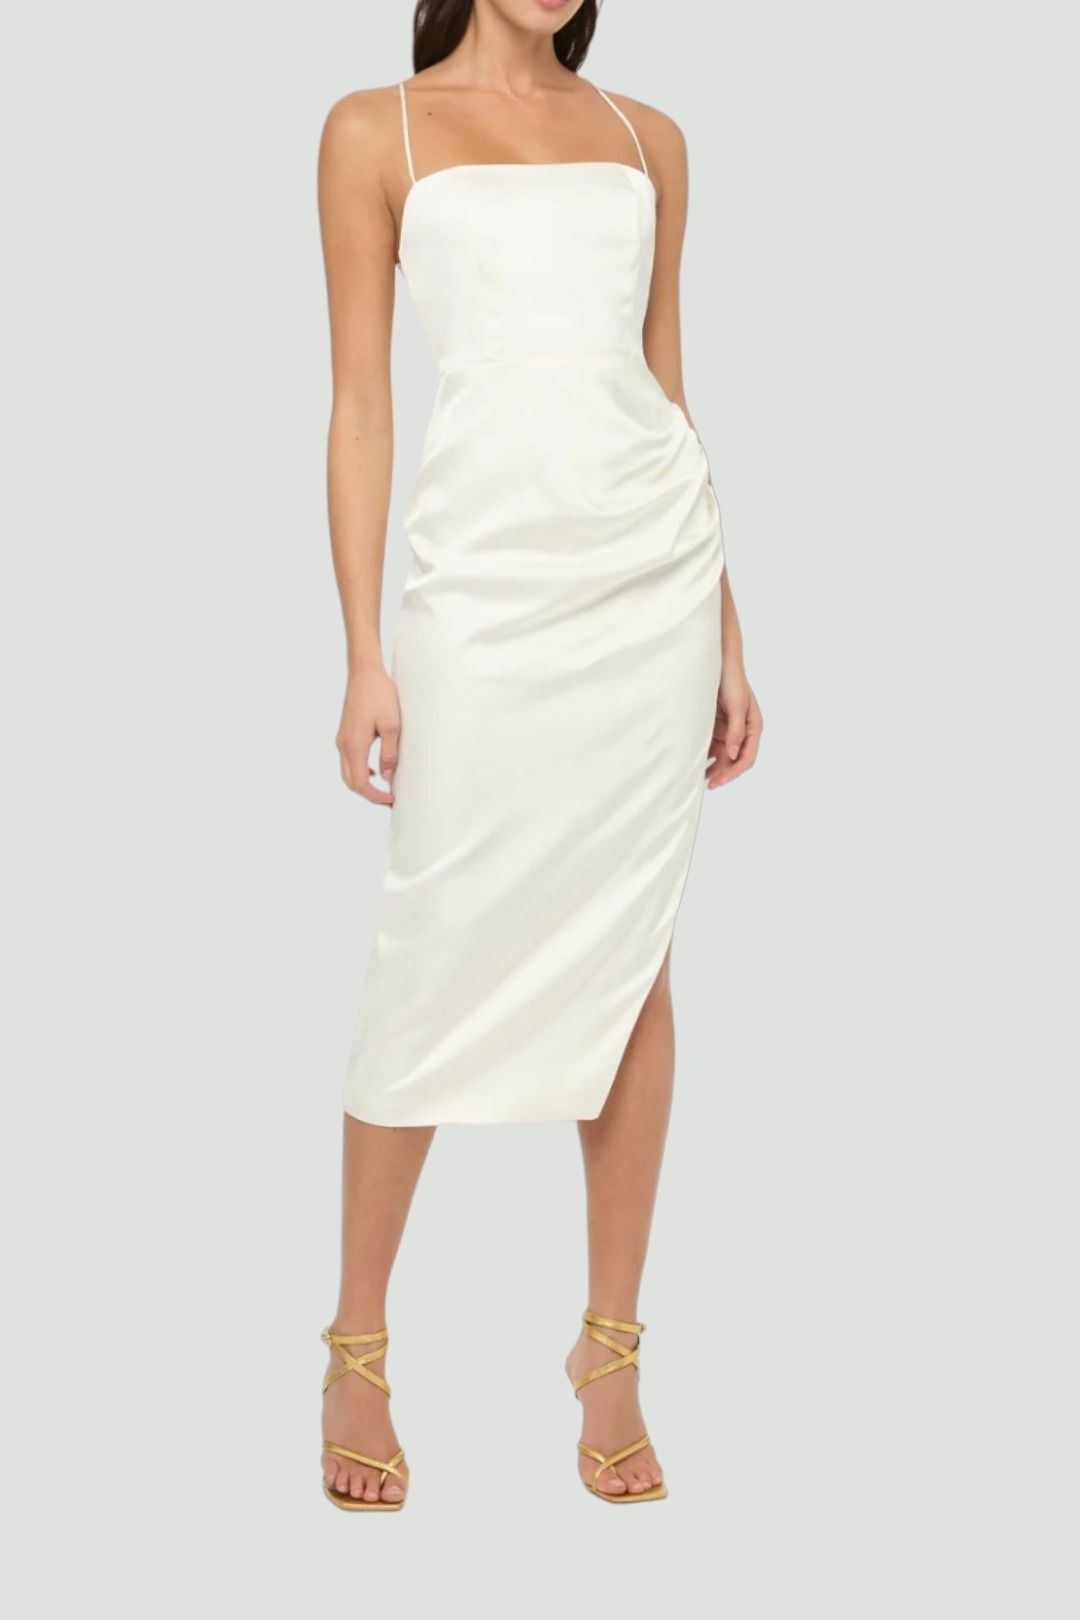 Manning Cartell - Miami Heat Backless Dress in White